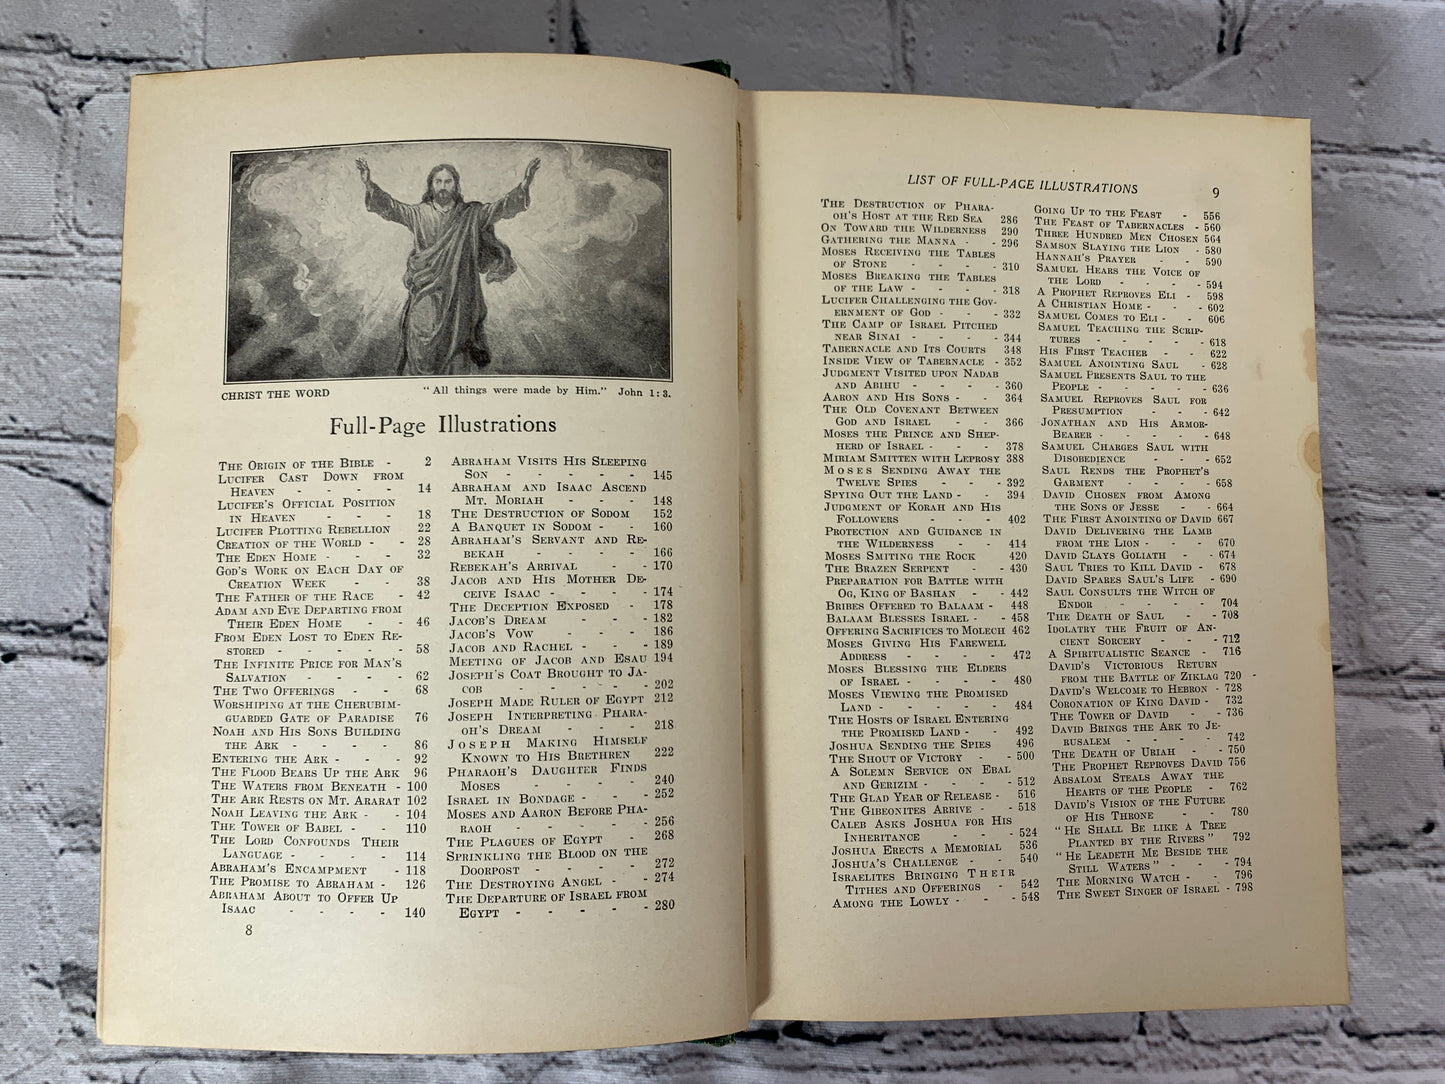 Patriarchs and Prophets by Ellen G. White [1927]